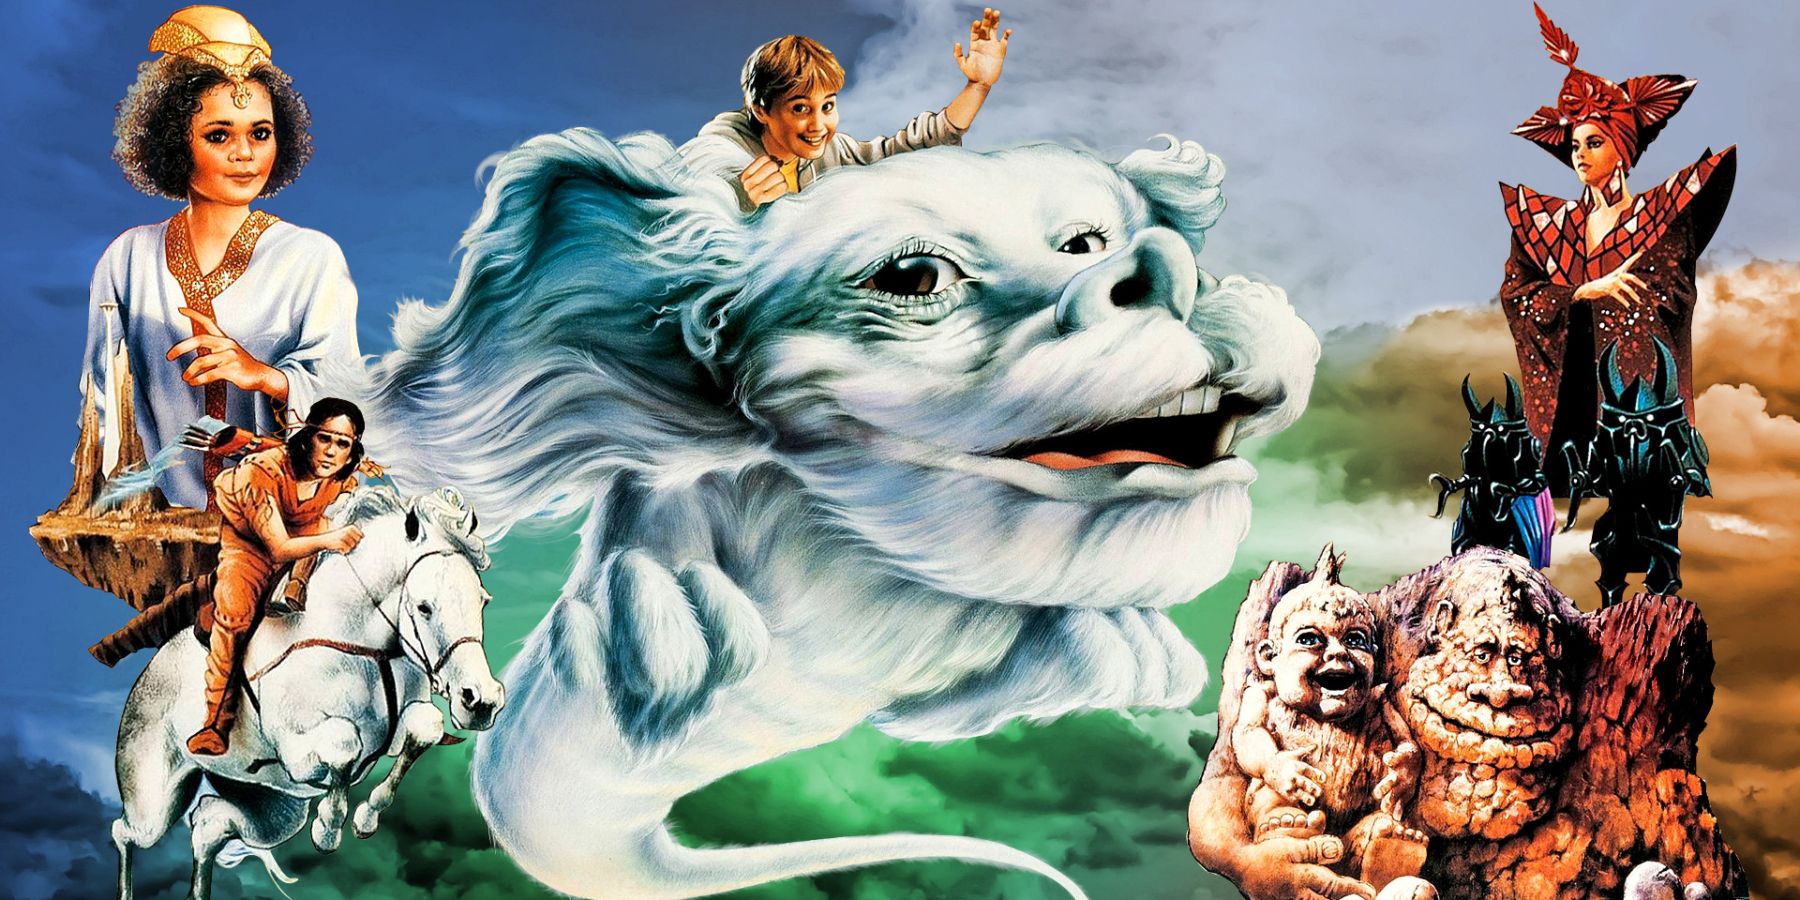 The NeverEnding Story II Gave The Story An Actual Ending